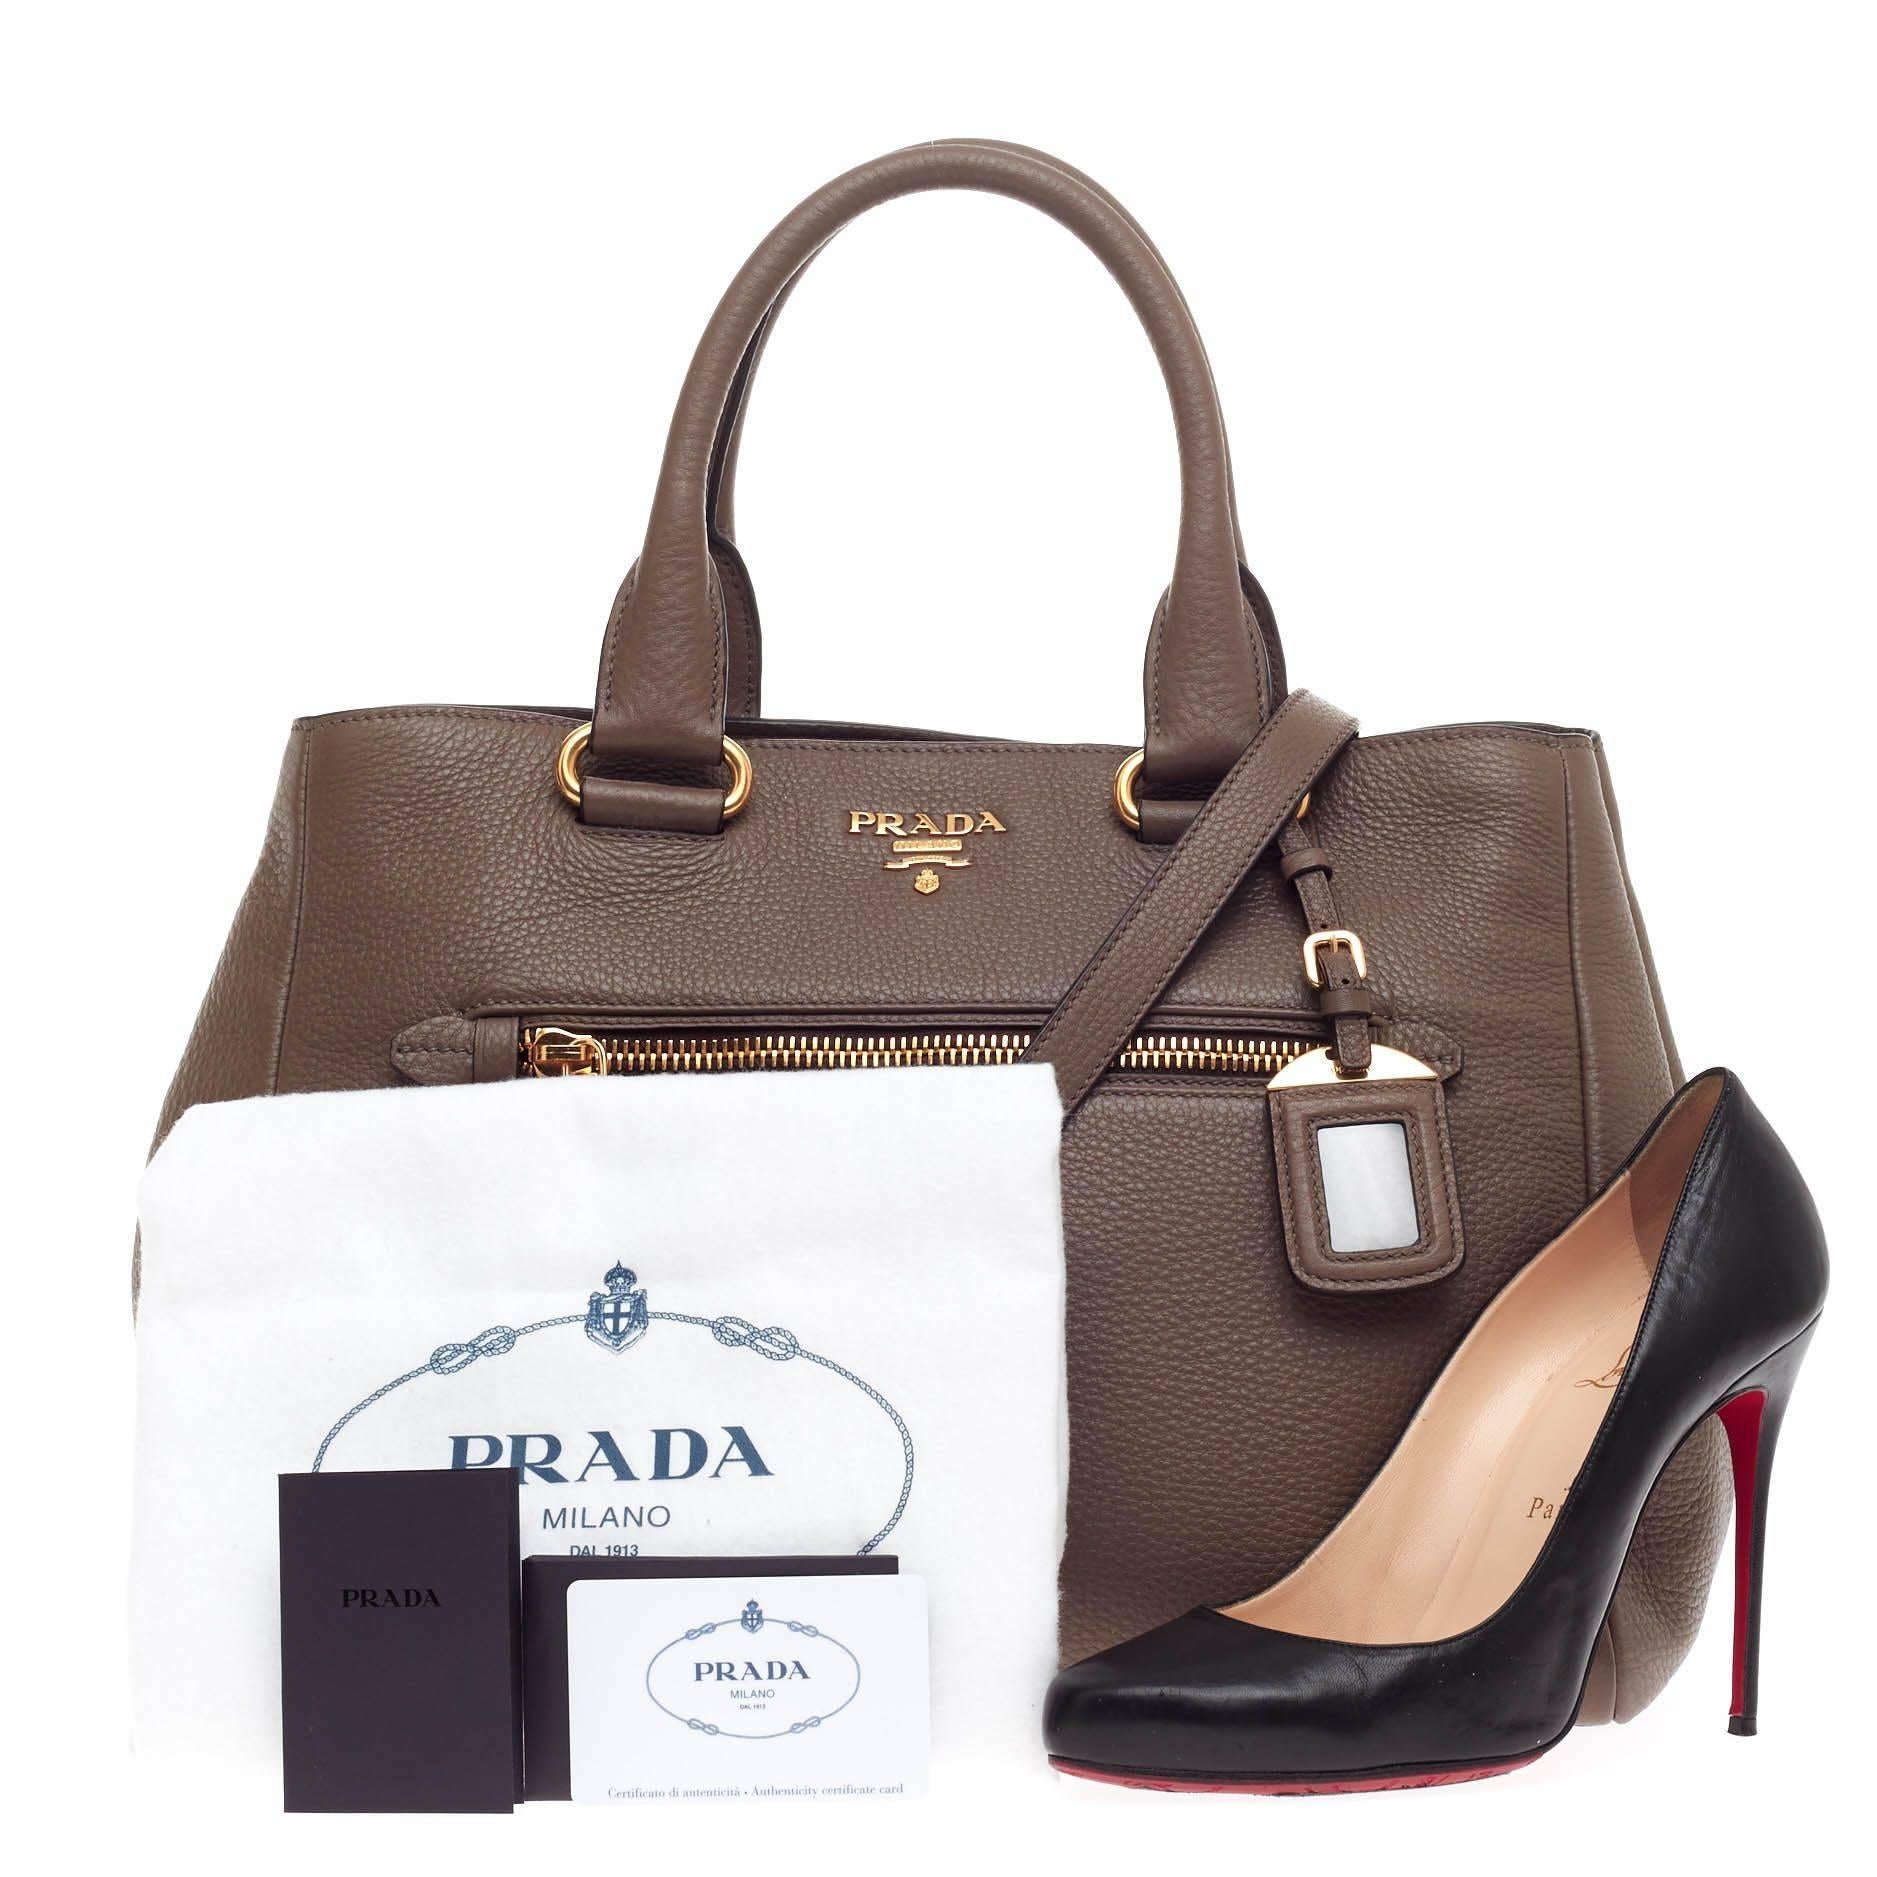 This authentic Prada Front Pocket Convertible Tote Vitello Daino Medium exudes a stylish and industrial design made for everyday excursions. Crafted from bambu taupe vitello daino leather, this tote features dual-rolled leather handles, front zip